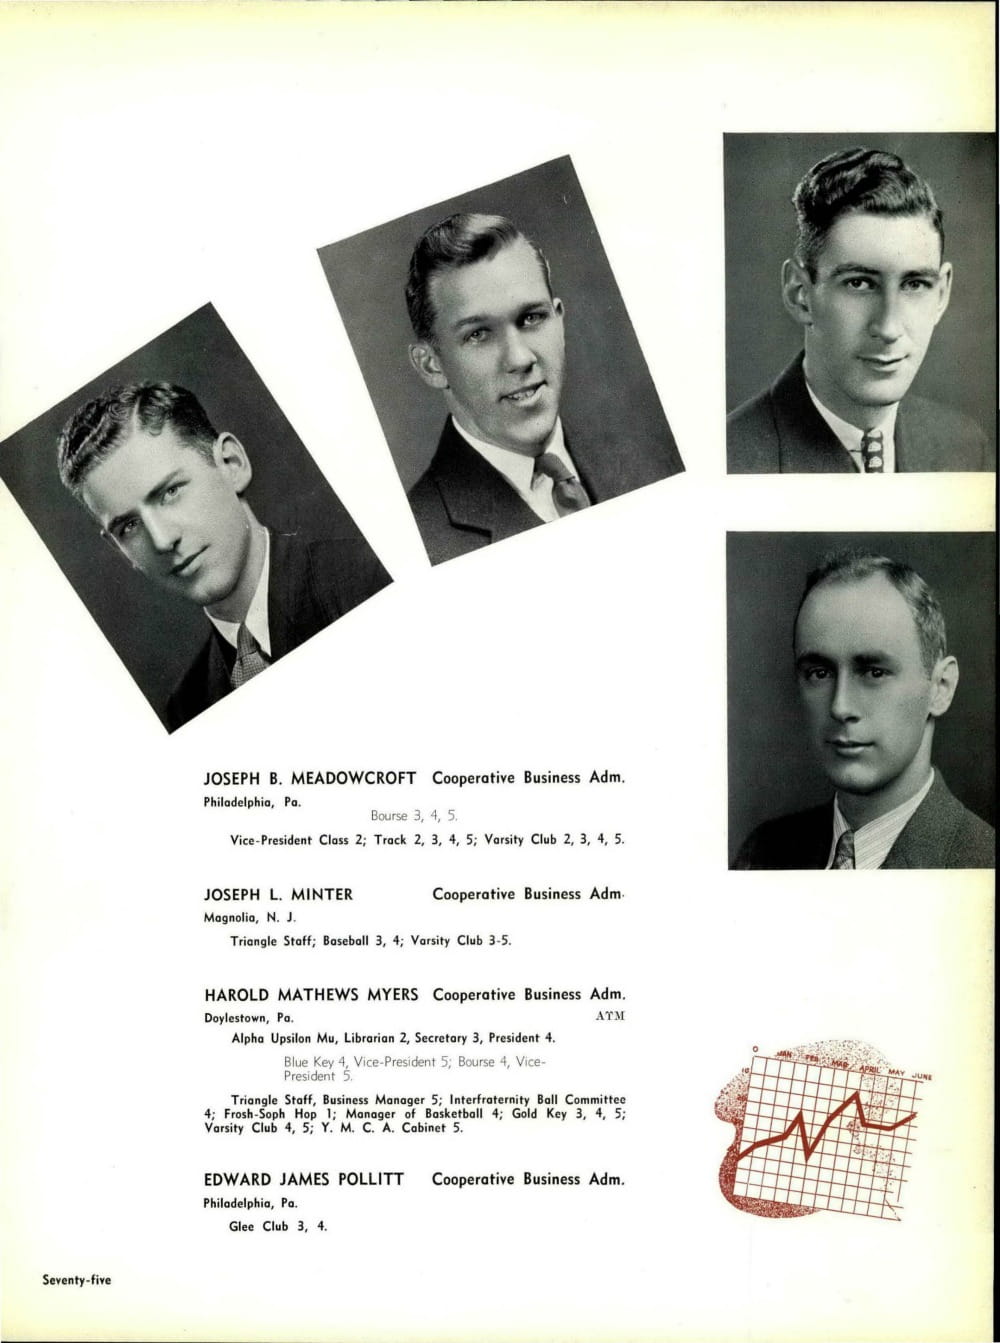 Harold Myers in the 1938 Lexerd yearbook. Photo courtesy University Archives.